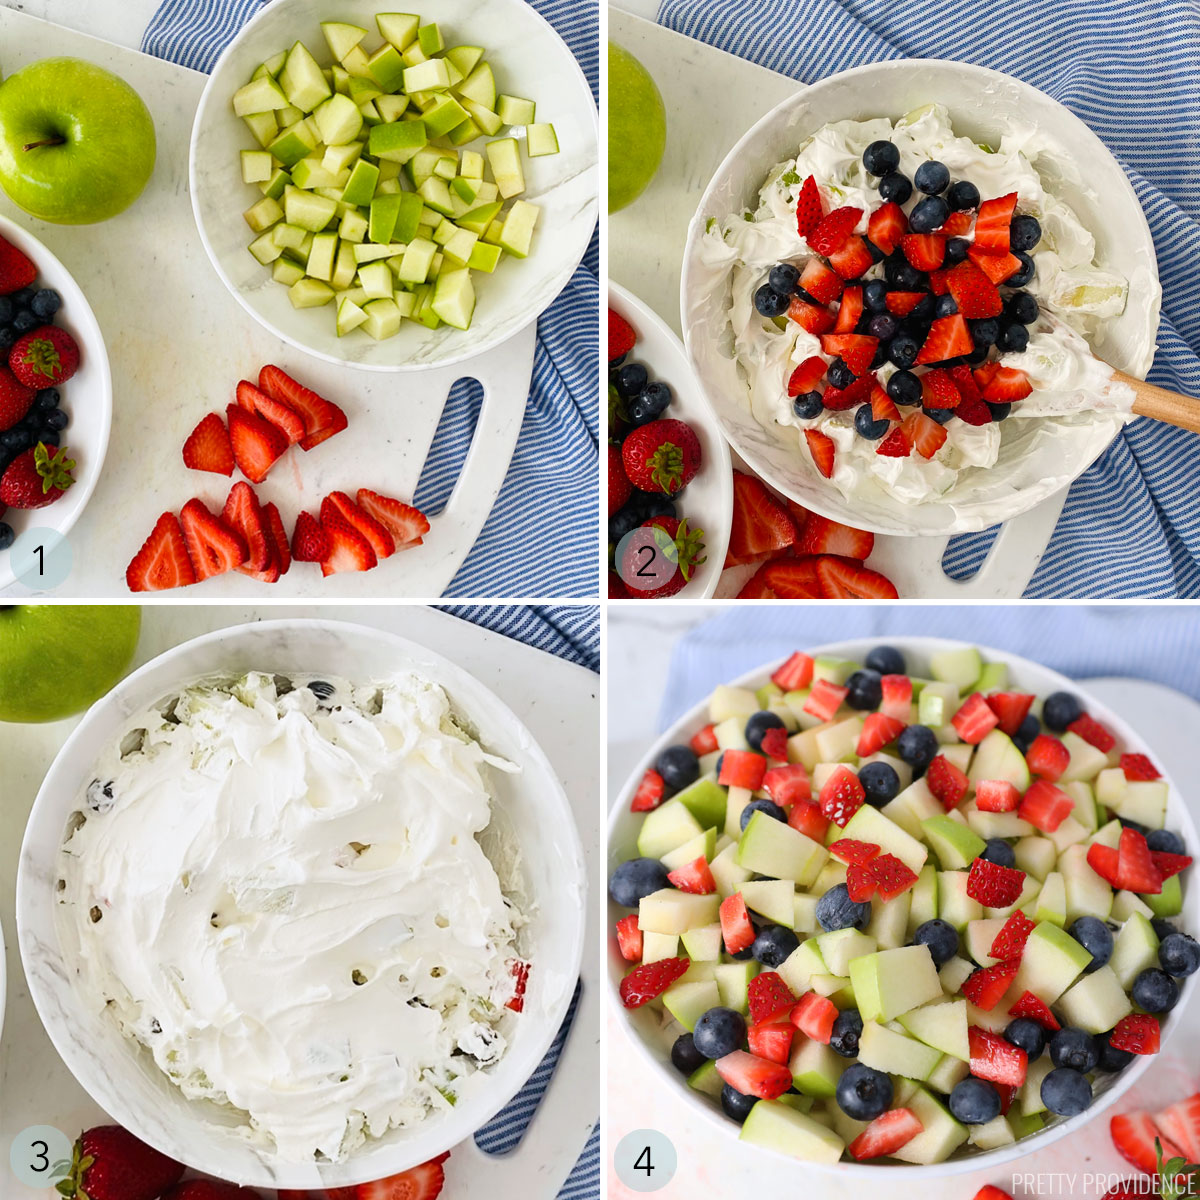 Step by step for making fruit salad with Cool Whip, granny smith apples, strawberries and blueberries